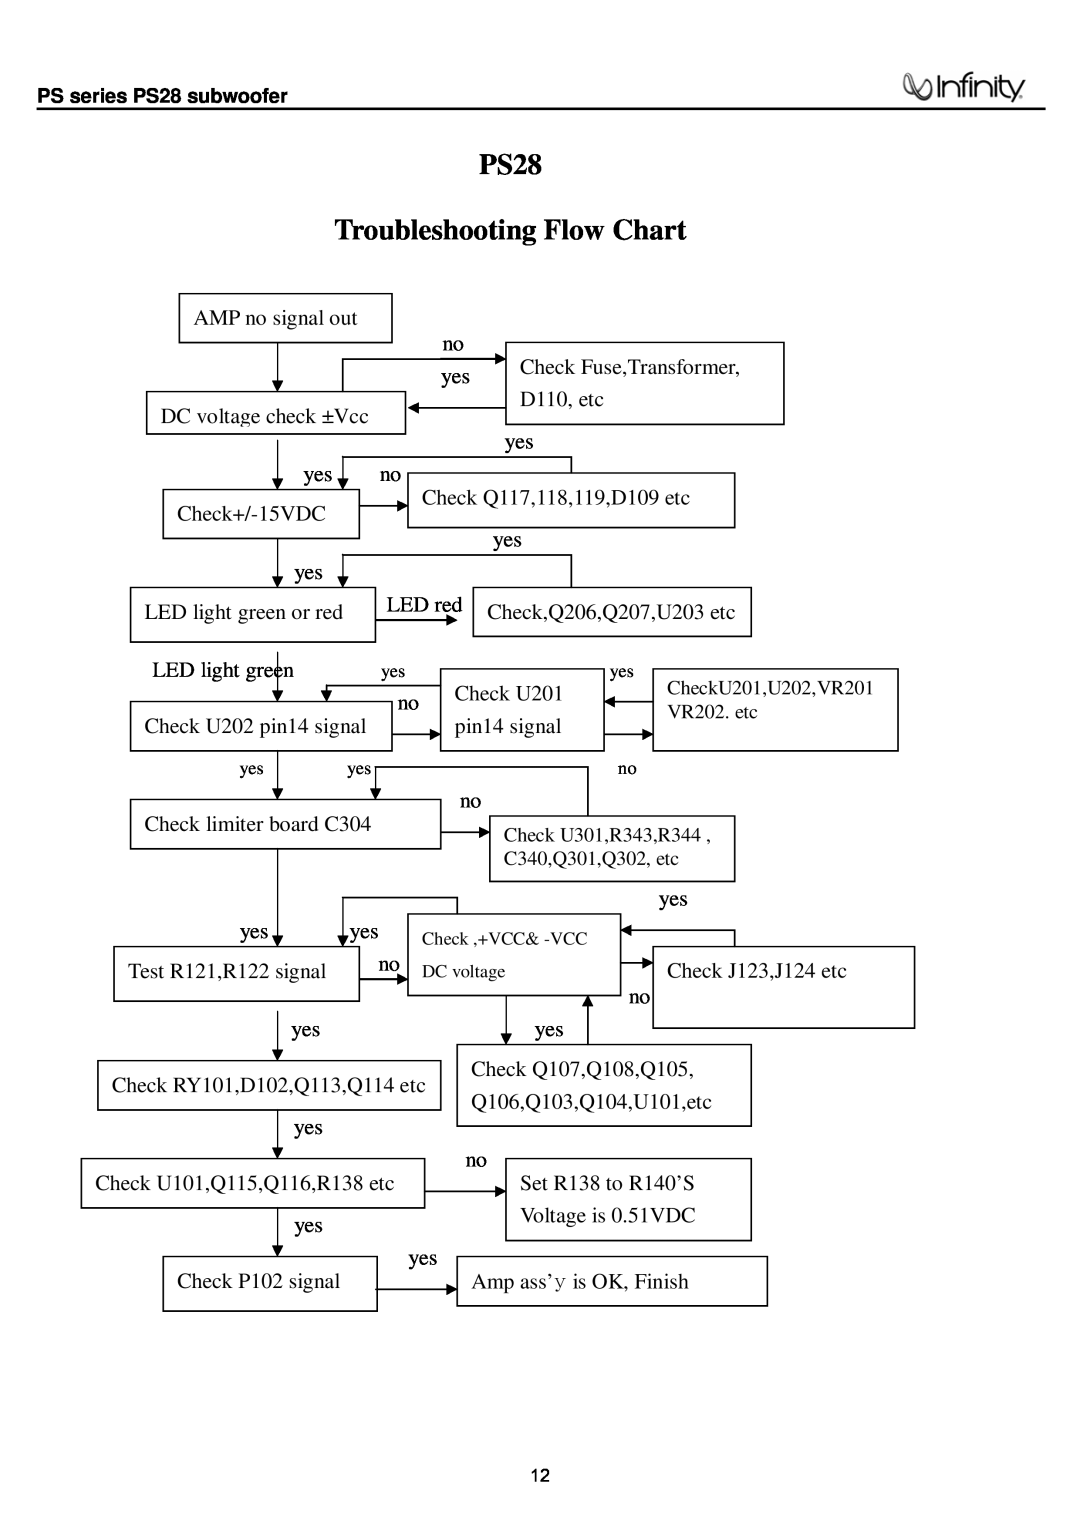 Infinity PS28 service manual Troubleshooting Flow Chart 